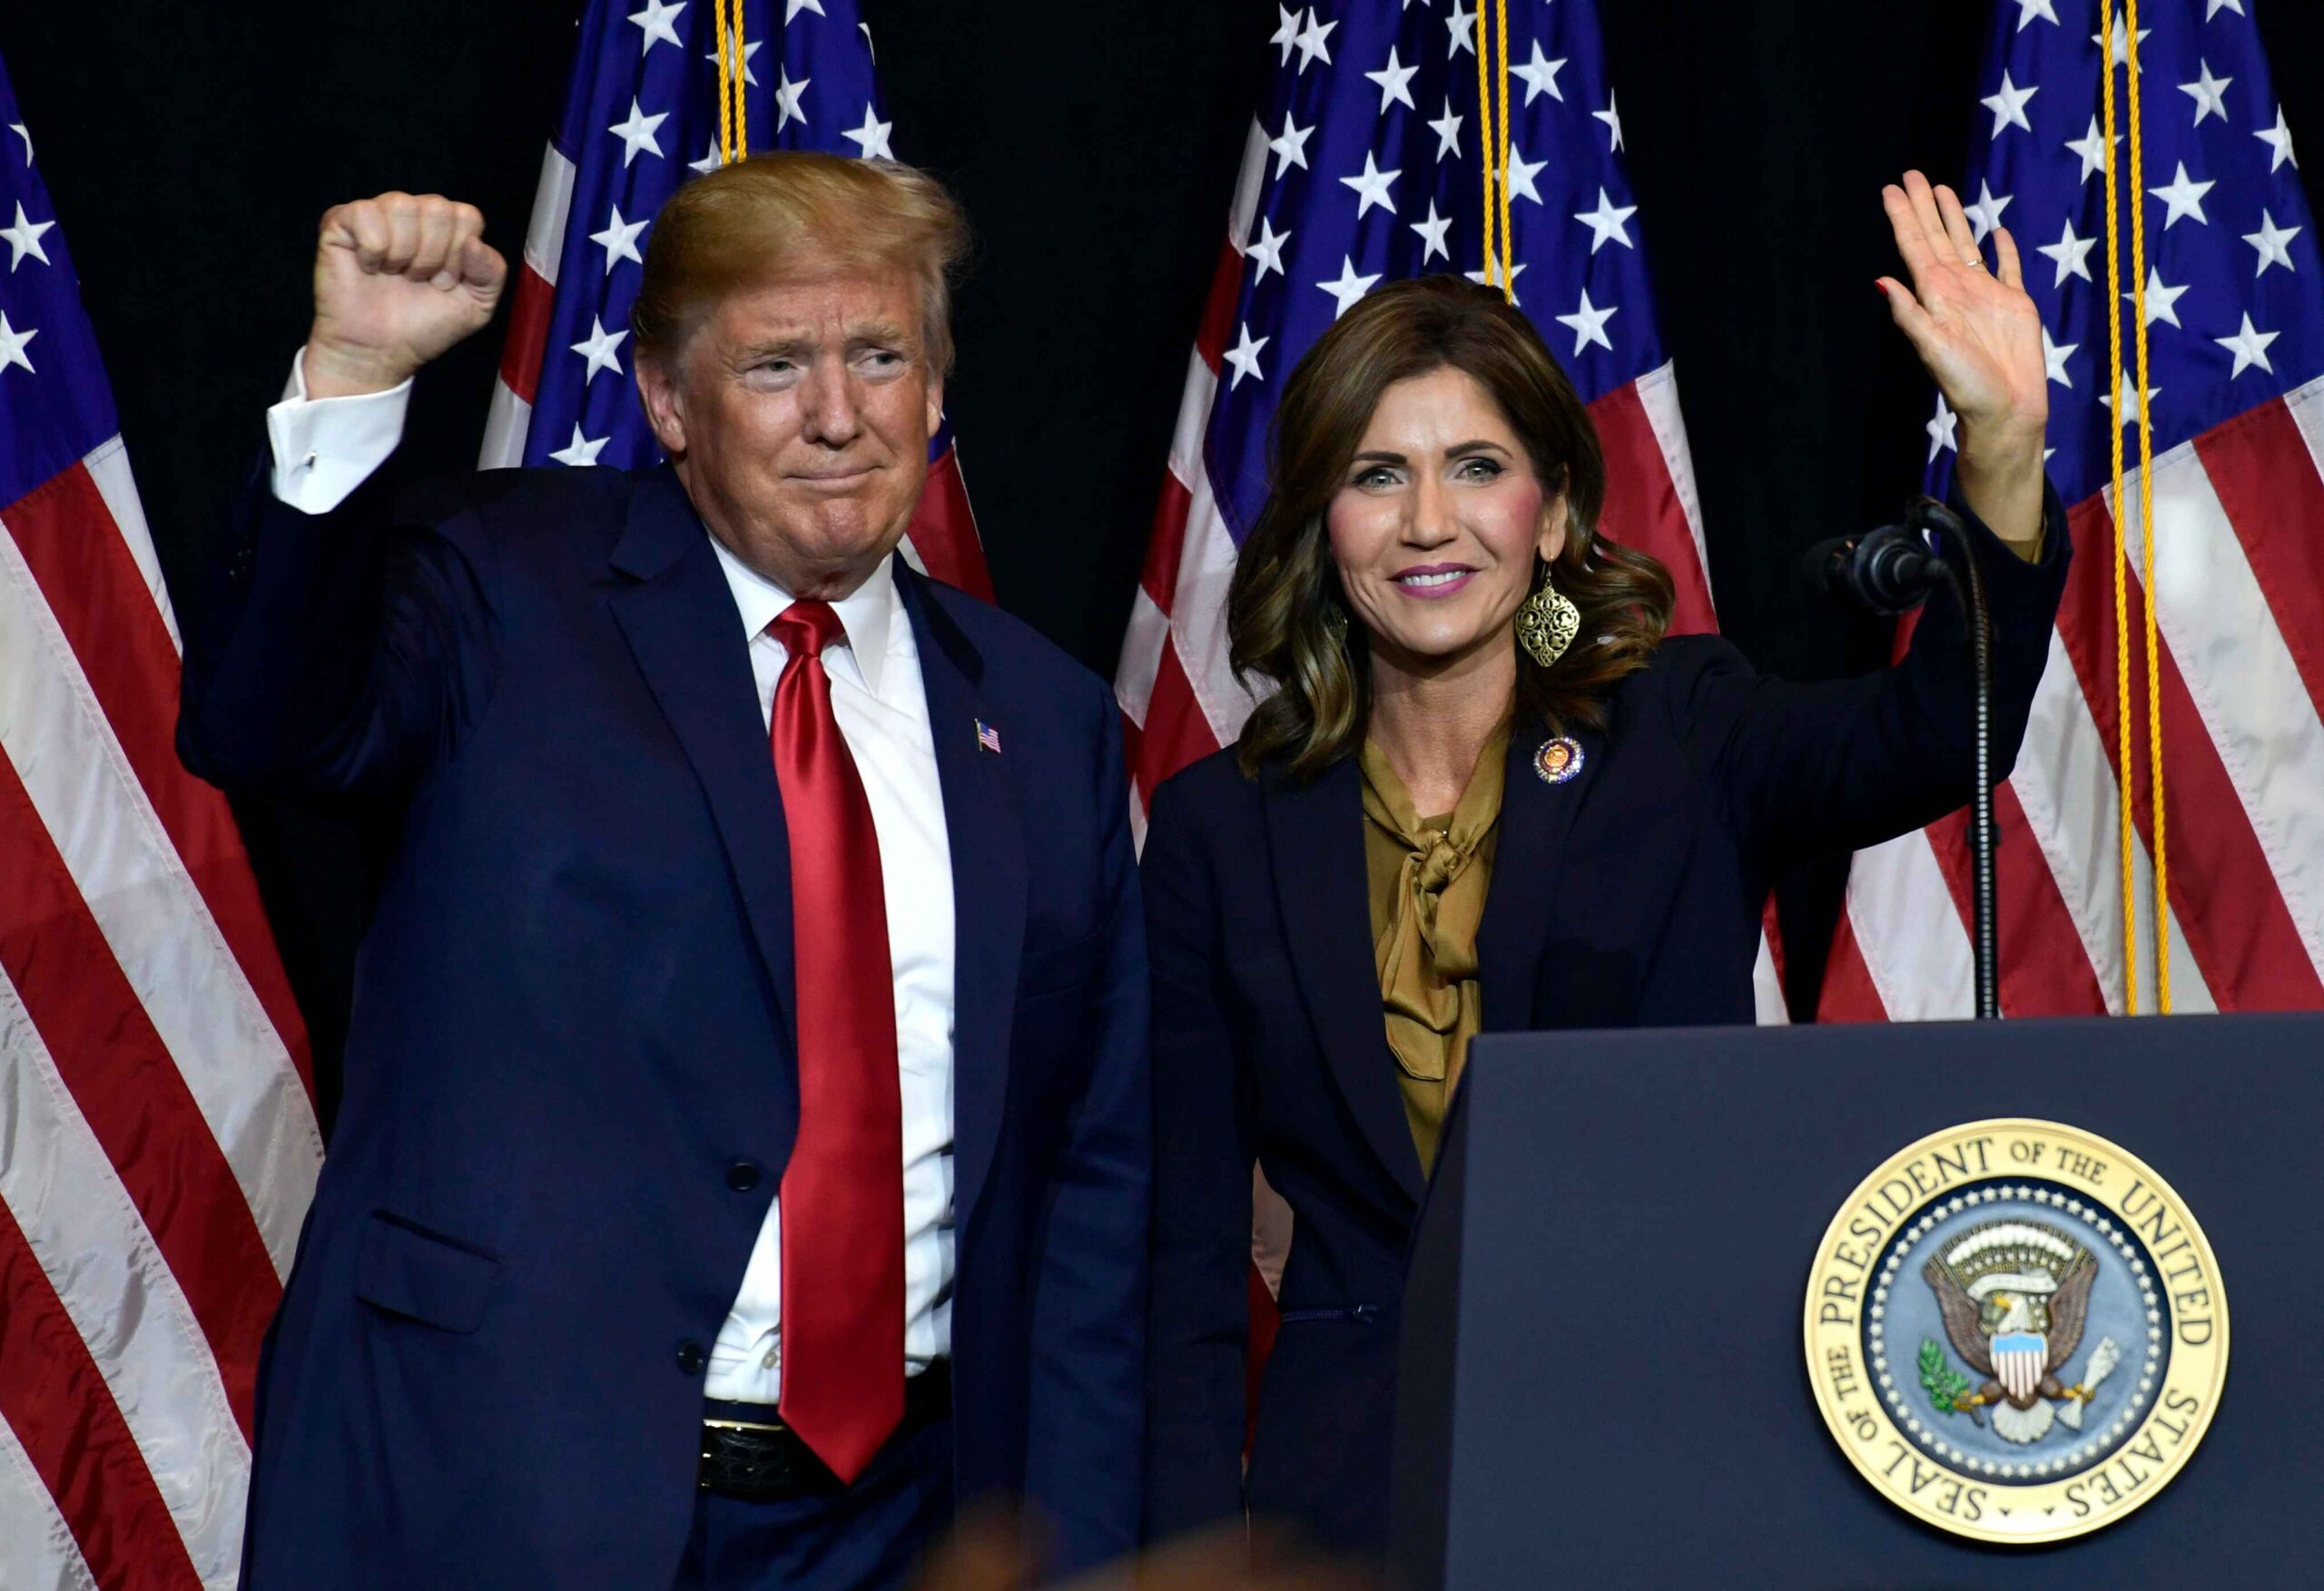 Former President Donald Trump announced he’s open to picking a female running mate for the 2024 presidential election if elected as the Republican nominee.